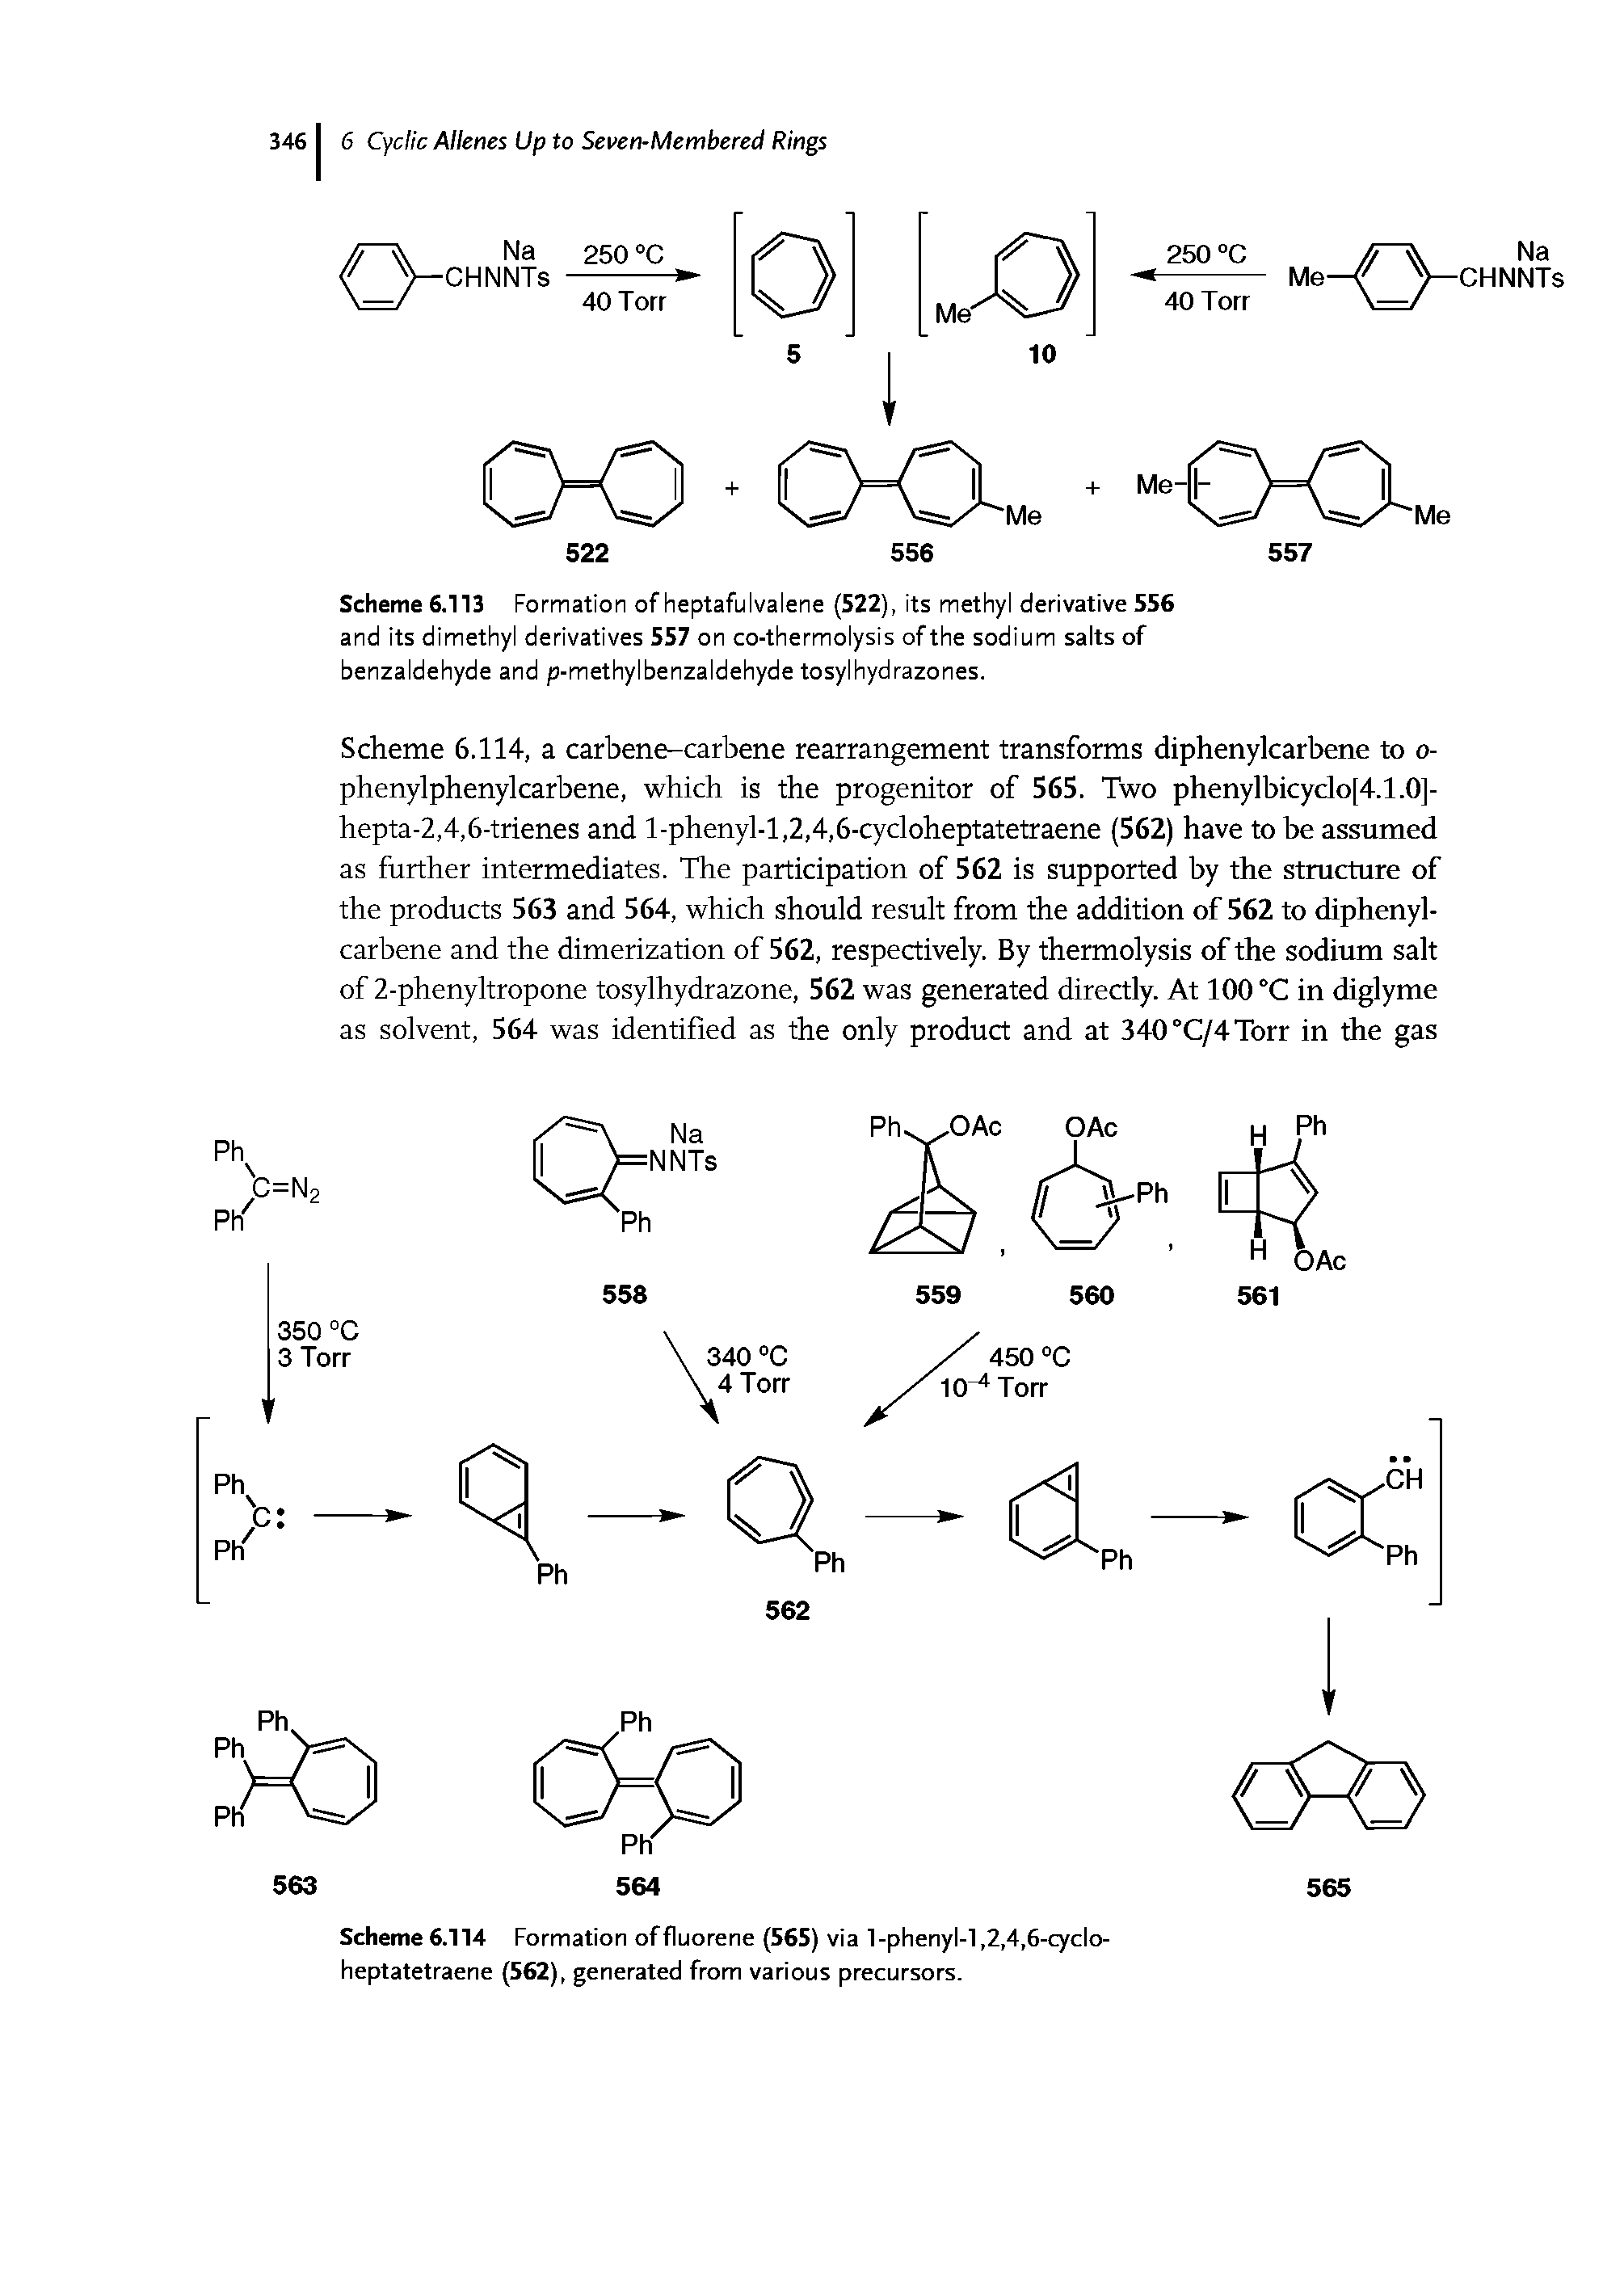 Scheme 6.113 Formation of heptafulvalene (522), its methyl derivative 556 and its dimethyl derivatives 557 on co-thermolysis of the sodium salts of benzaldehyde and p-methylbenzaldehyde tosylhydrazones.